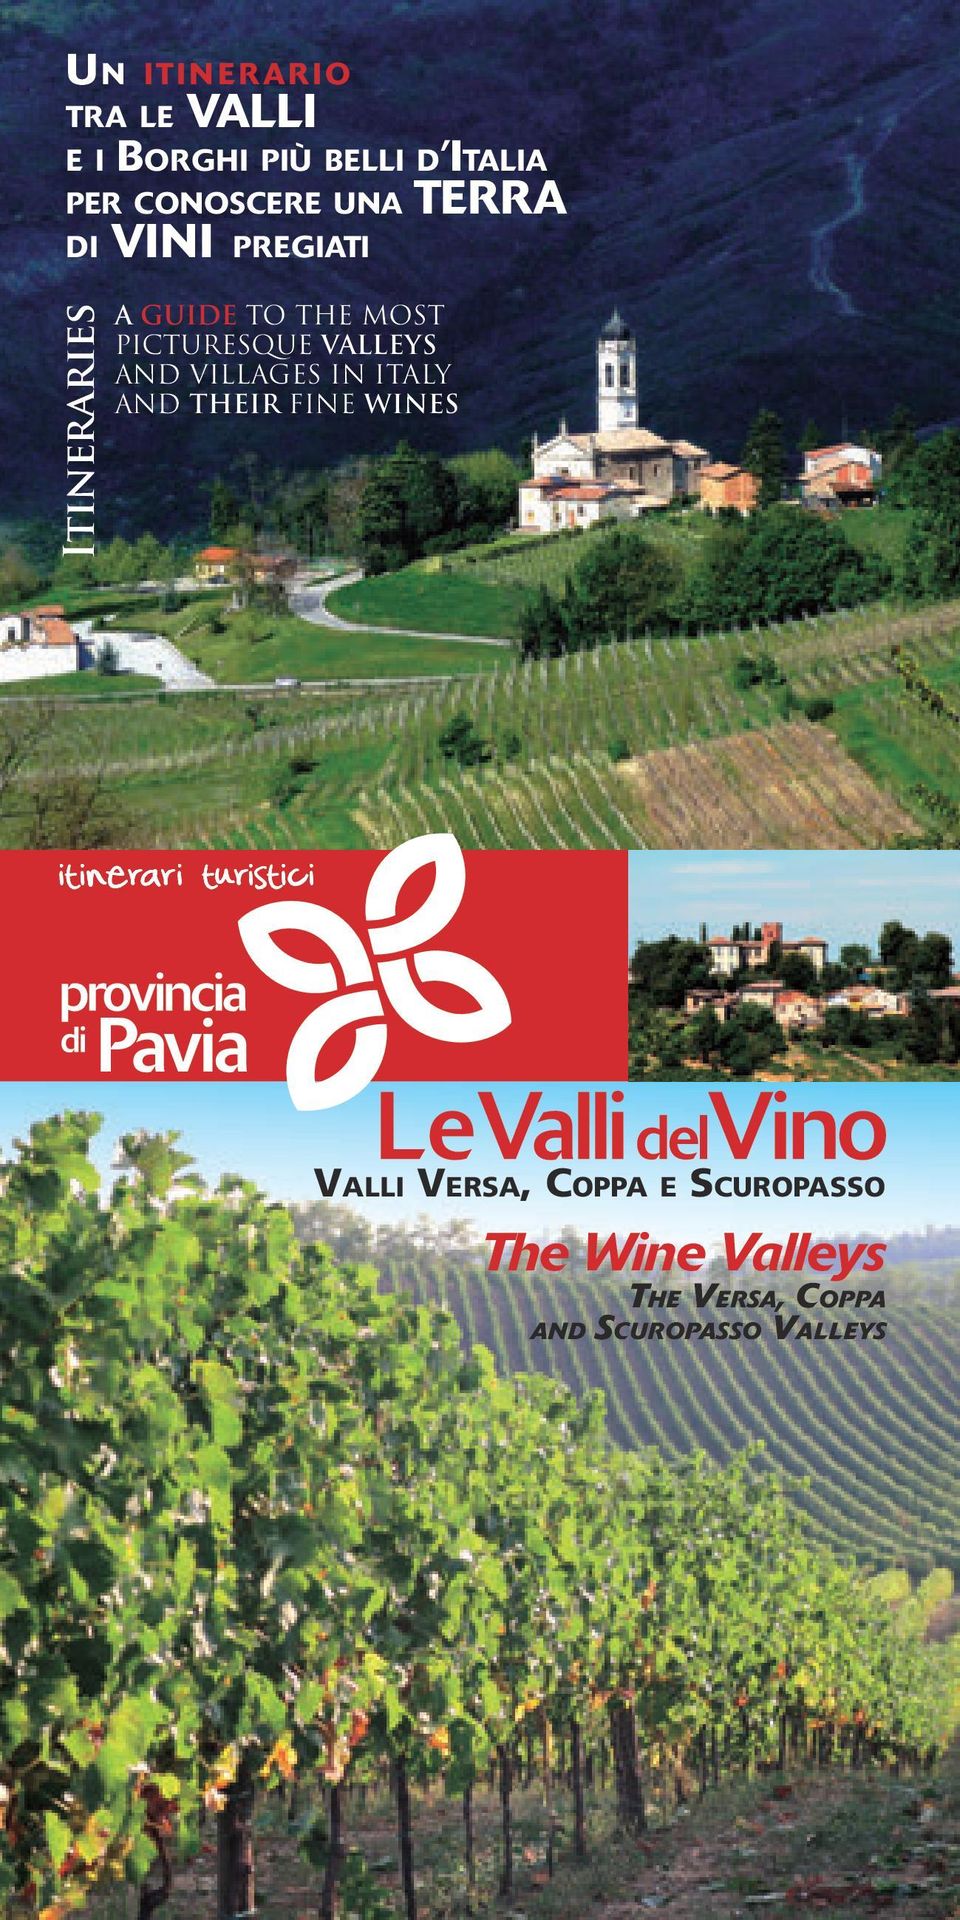 PICTURESQUE VALLEYS AND VILLAGES IN ITALY AND THEIR FINE WINES Valli